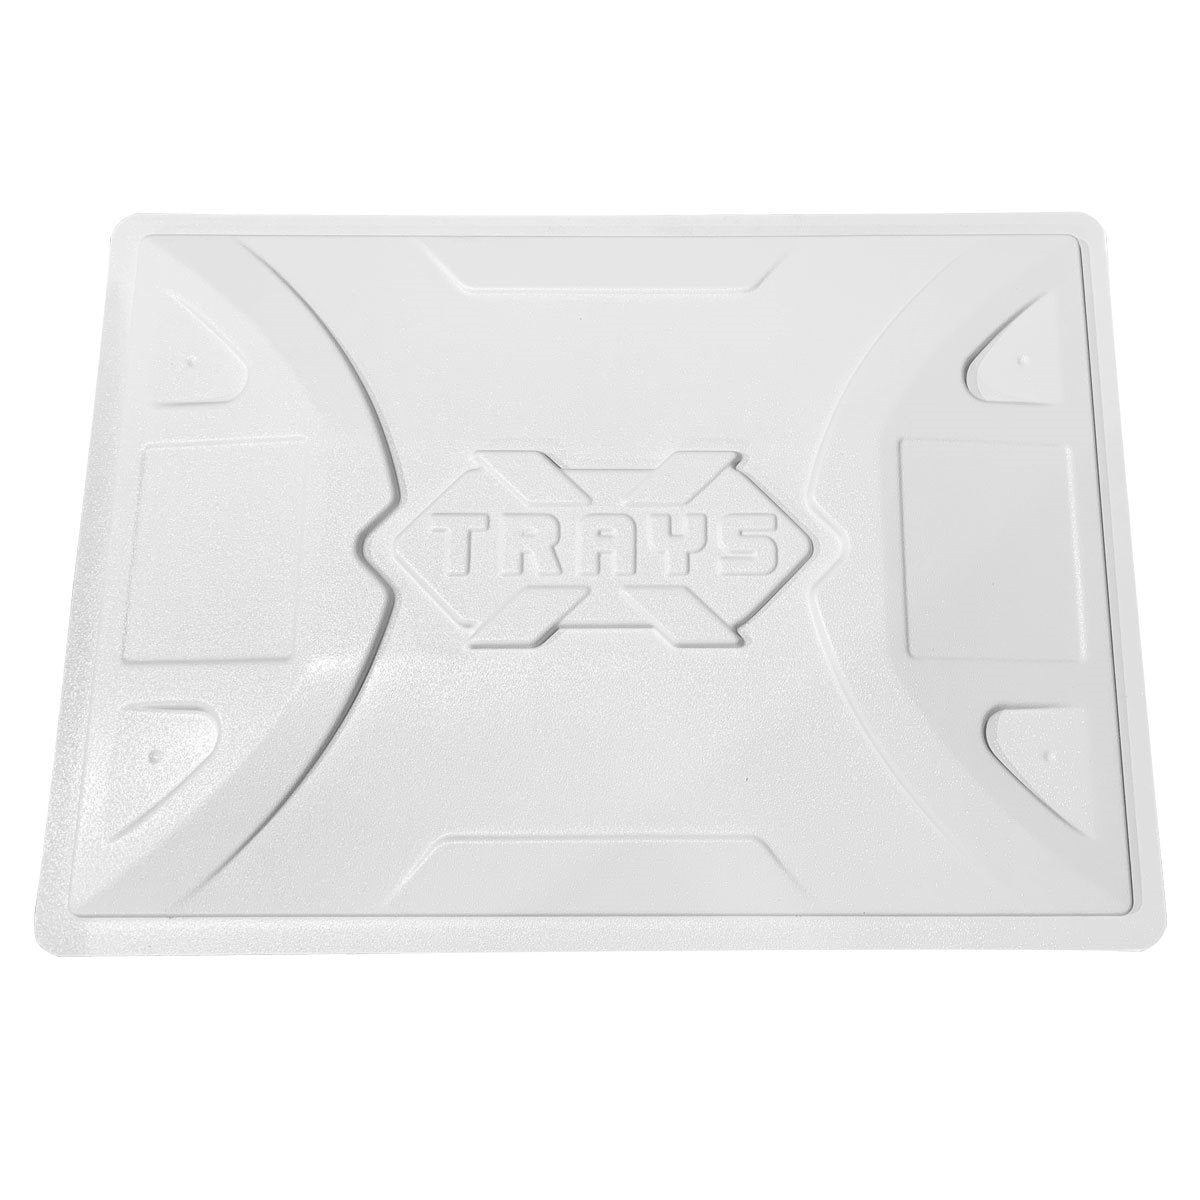 Product Image:XTrays Reservoir Lid 50 Gal White